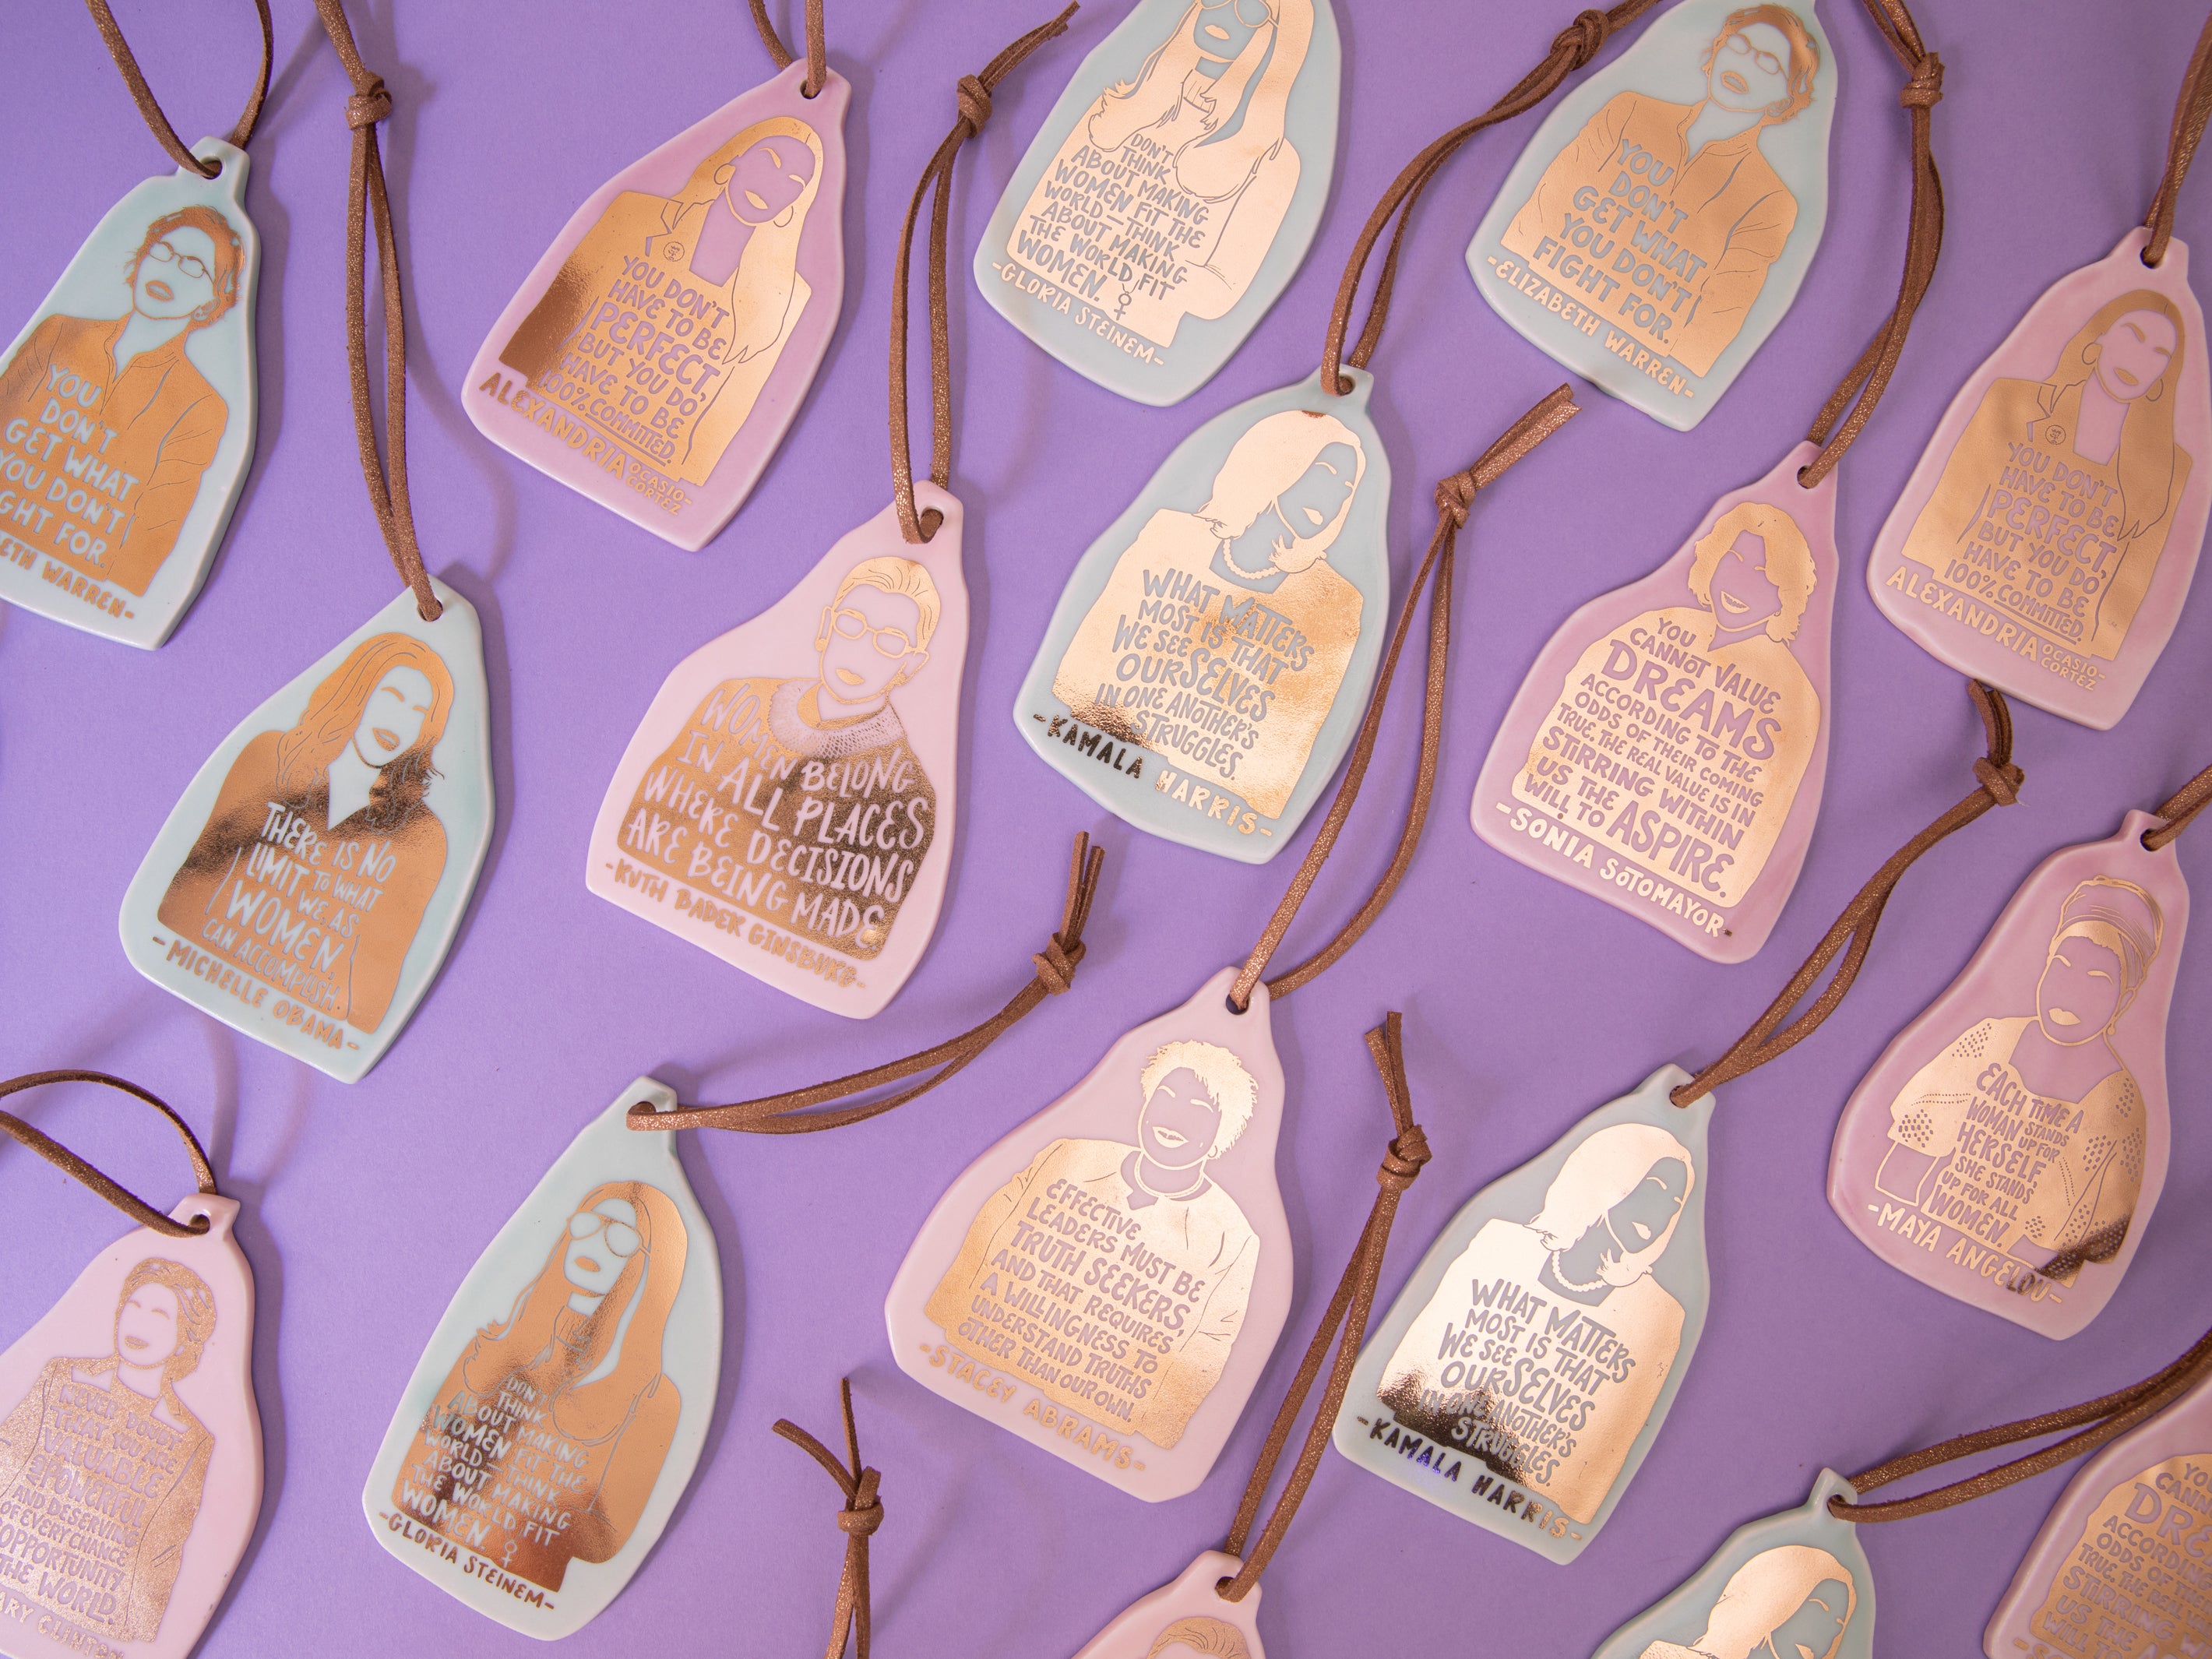 Assortment of feminist ceramic ornaments with gold foil by ARCHd and Christina Kosinski on purple background